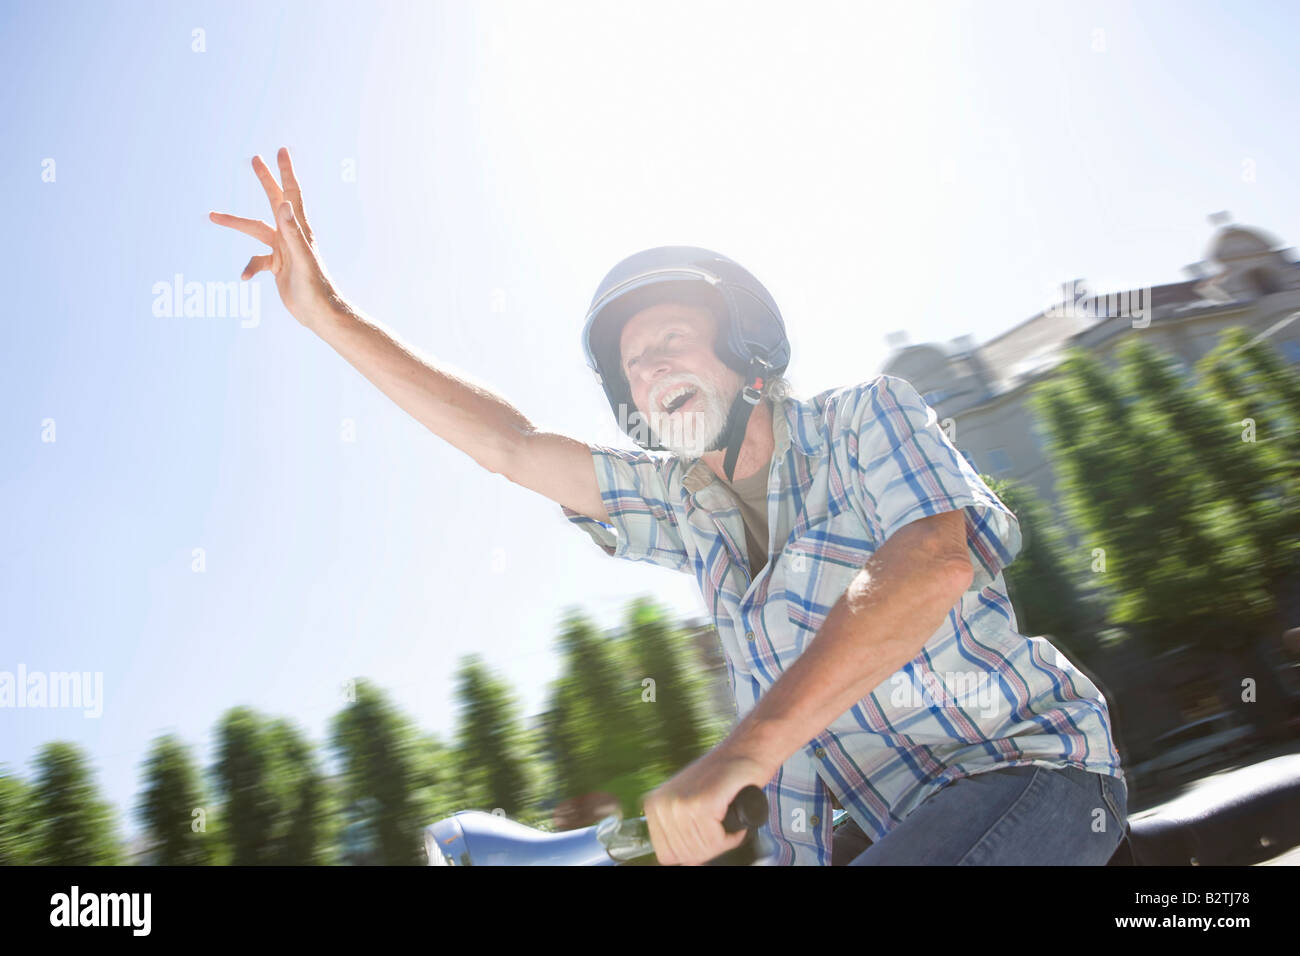 Man on scooter, waving Stock Photo